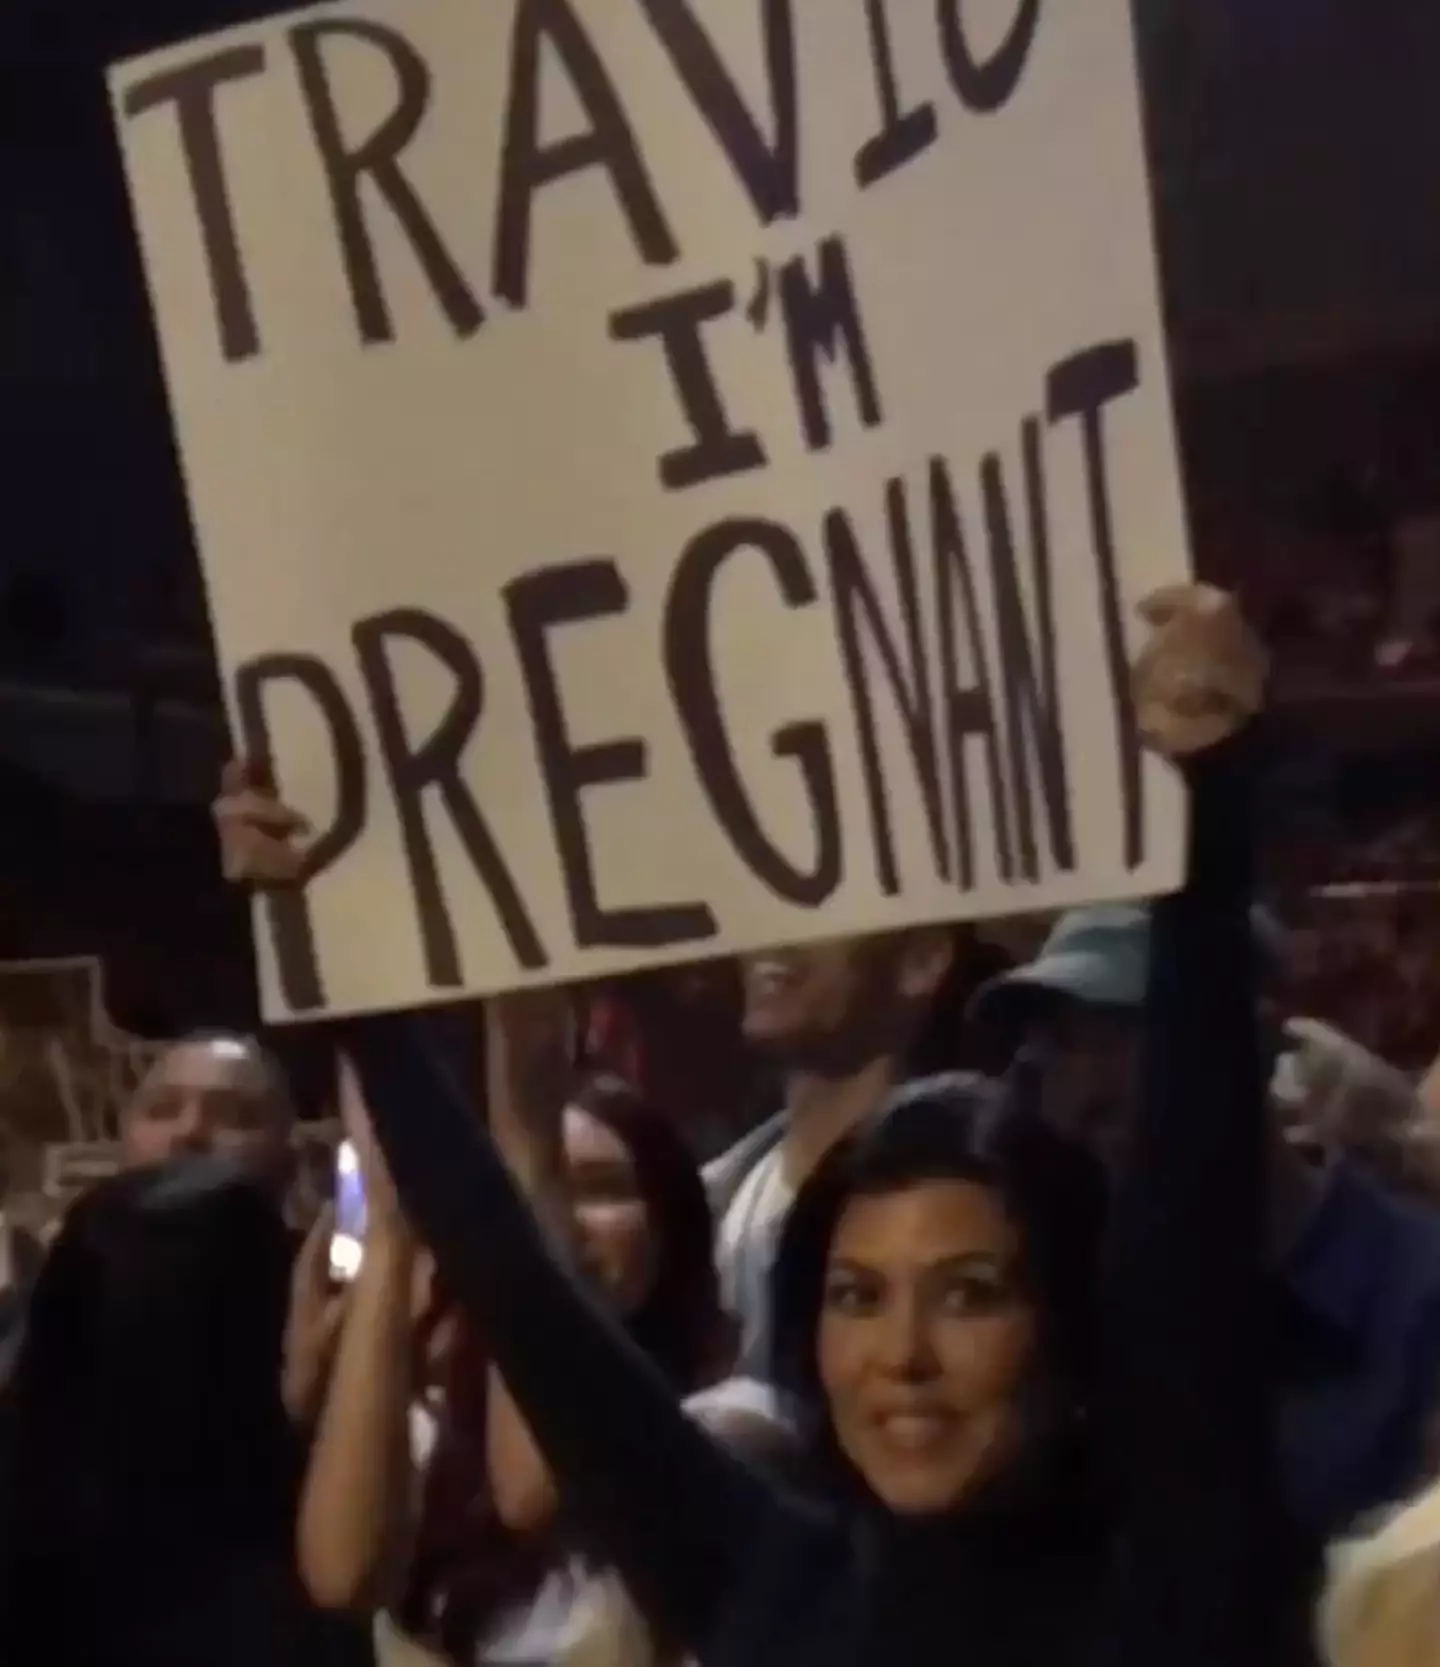 Kourtney held up a poster at the Blink 182 gig to announce her pregnancy.